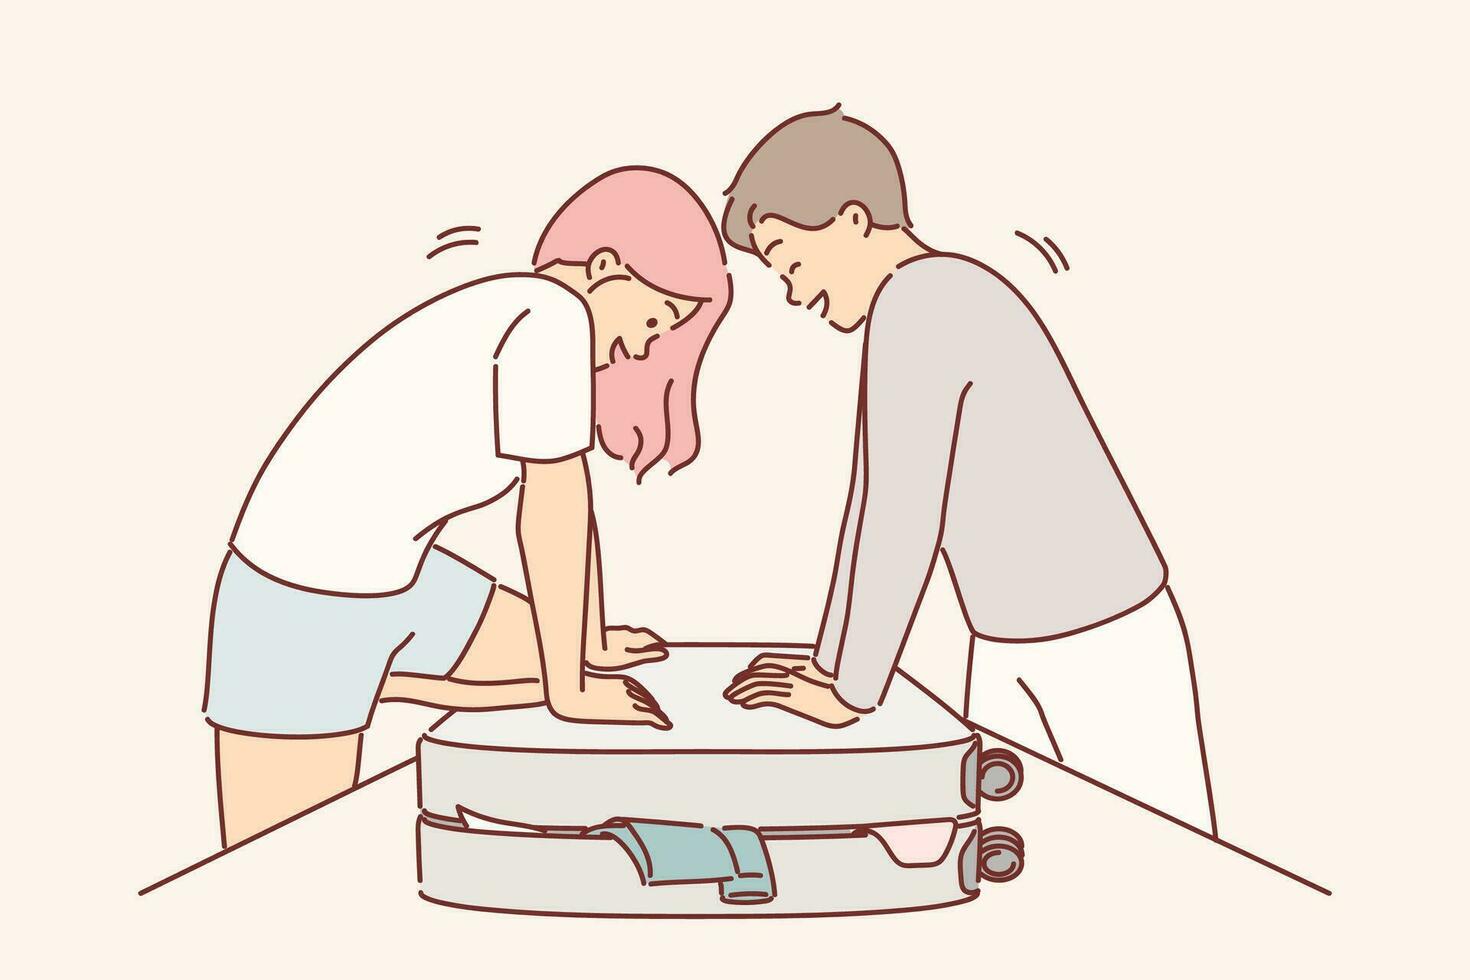 Couple is packing up luggage for travel and trying to close overstuffed suitcase full of clothes. Happy man and woman packing travel bag for vacation trip feeling joyful anticipation of voyage vector